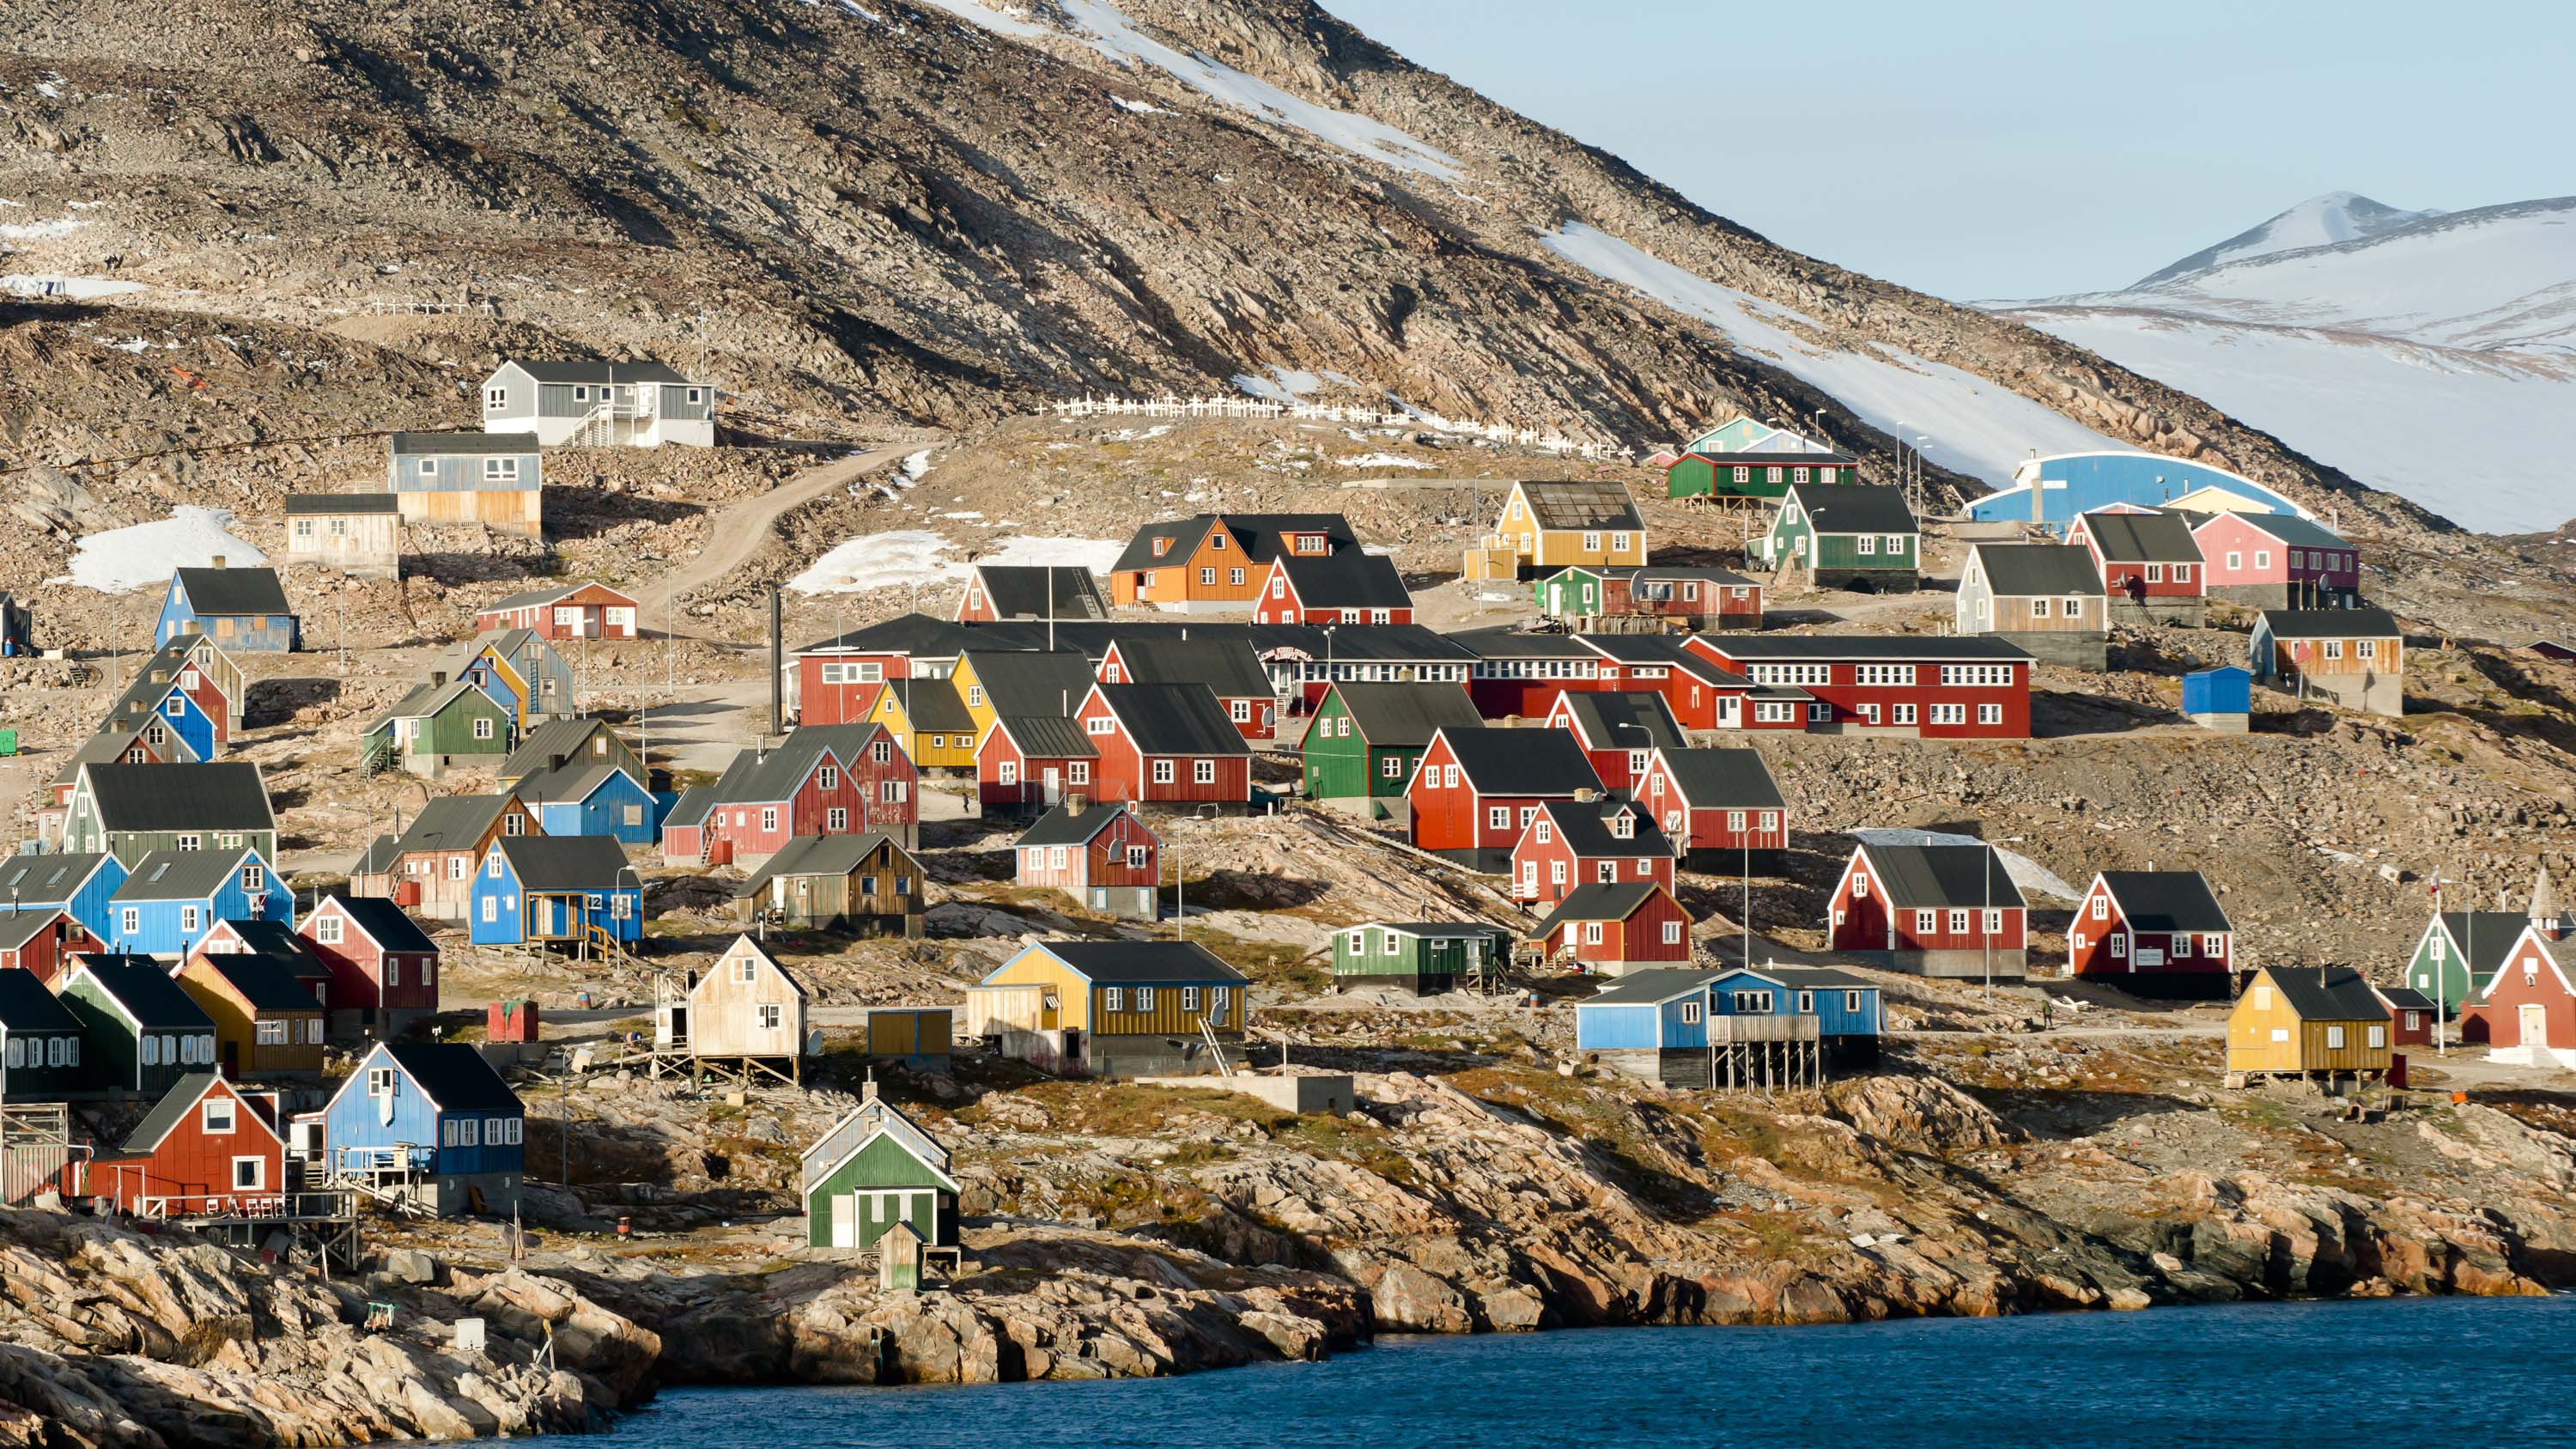 <p><strong>Estimated cost:</strong> $1,889</p> <p>Discover the most remote inhabited community in the Western Hemisphere when you visit the village of Ittoqqortoormiit. Just a few hundred people live in this colorful village, featuring houses painted bright shades of blue, red, gold and green, clinging to the foot of a snowy coastal mountain.</p> <p>Stay in the village and immerse yourself in local culture from visiting the local museum to seeing people go about their daily routines. You can also take a tour of other villages via dogsled or cross-country ski, or go sightseeing on snowmobile or foot.</p> <p><strong>How to get there:</strong> Fly to Reykjavik. The second flight to Akureyri lets you transfer to a small aircraft to access Nerlerit Inaat Airport, Greenland. Although this is the main airport, you won't be renting a car and going on your way. A 15-minute helicopter flight shuttles you from the airport into town.</p>